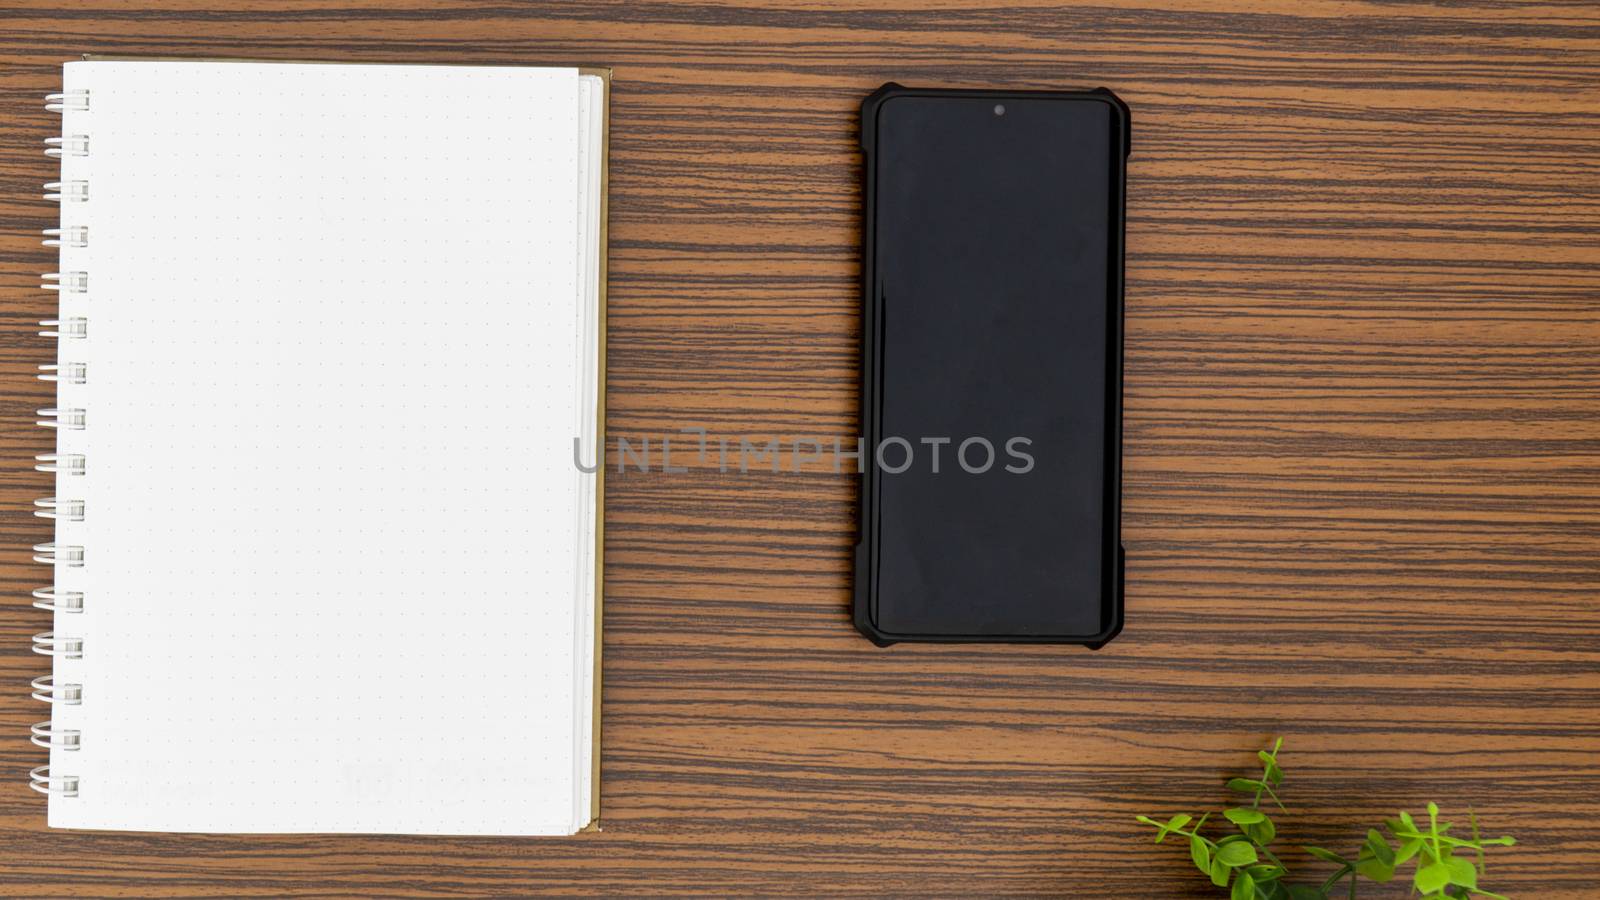 Personal note book and a black mobile phone with a glimpse of green plant on a striped brown office table